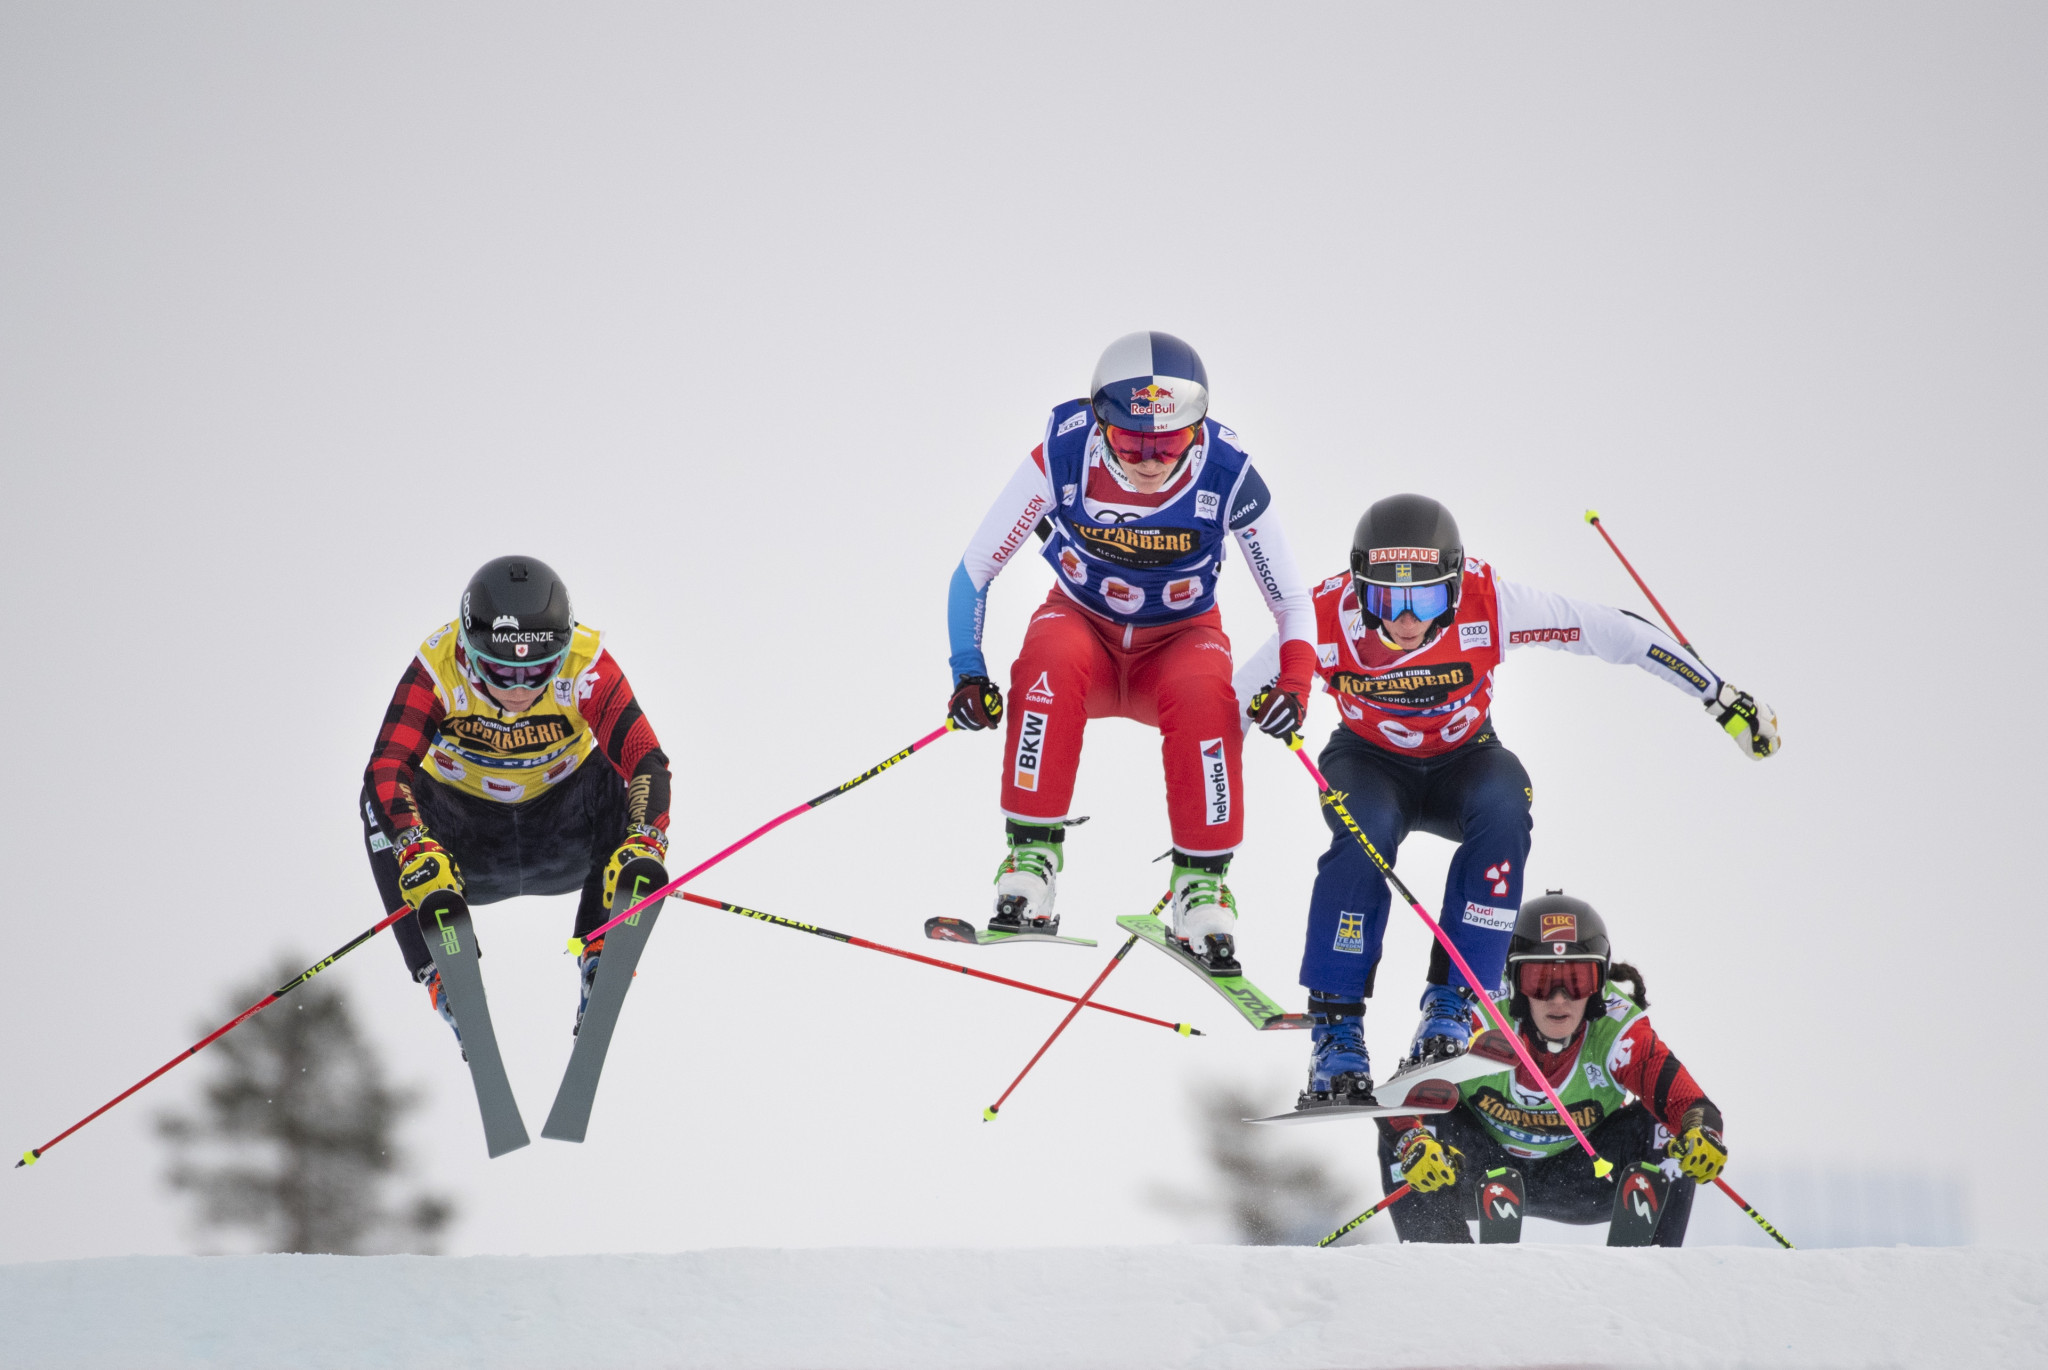 Ski cross competition is set to take place on the final day of the World Championships ©Getty Images